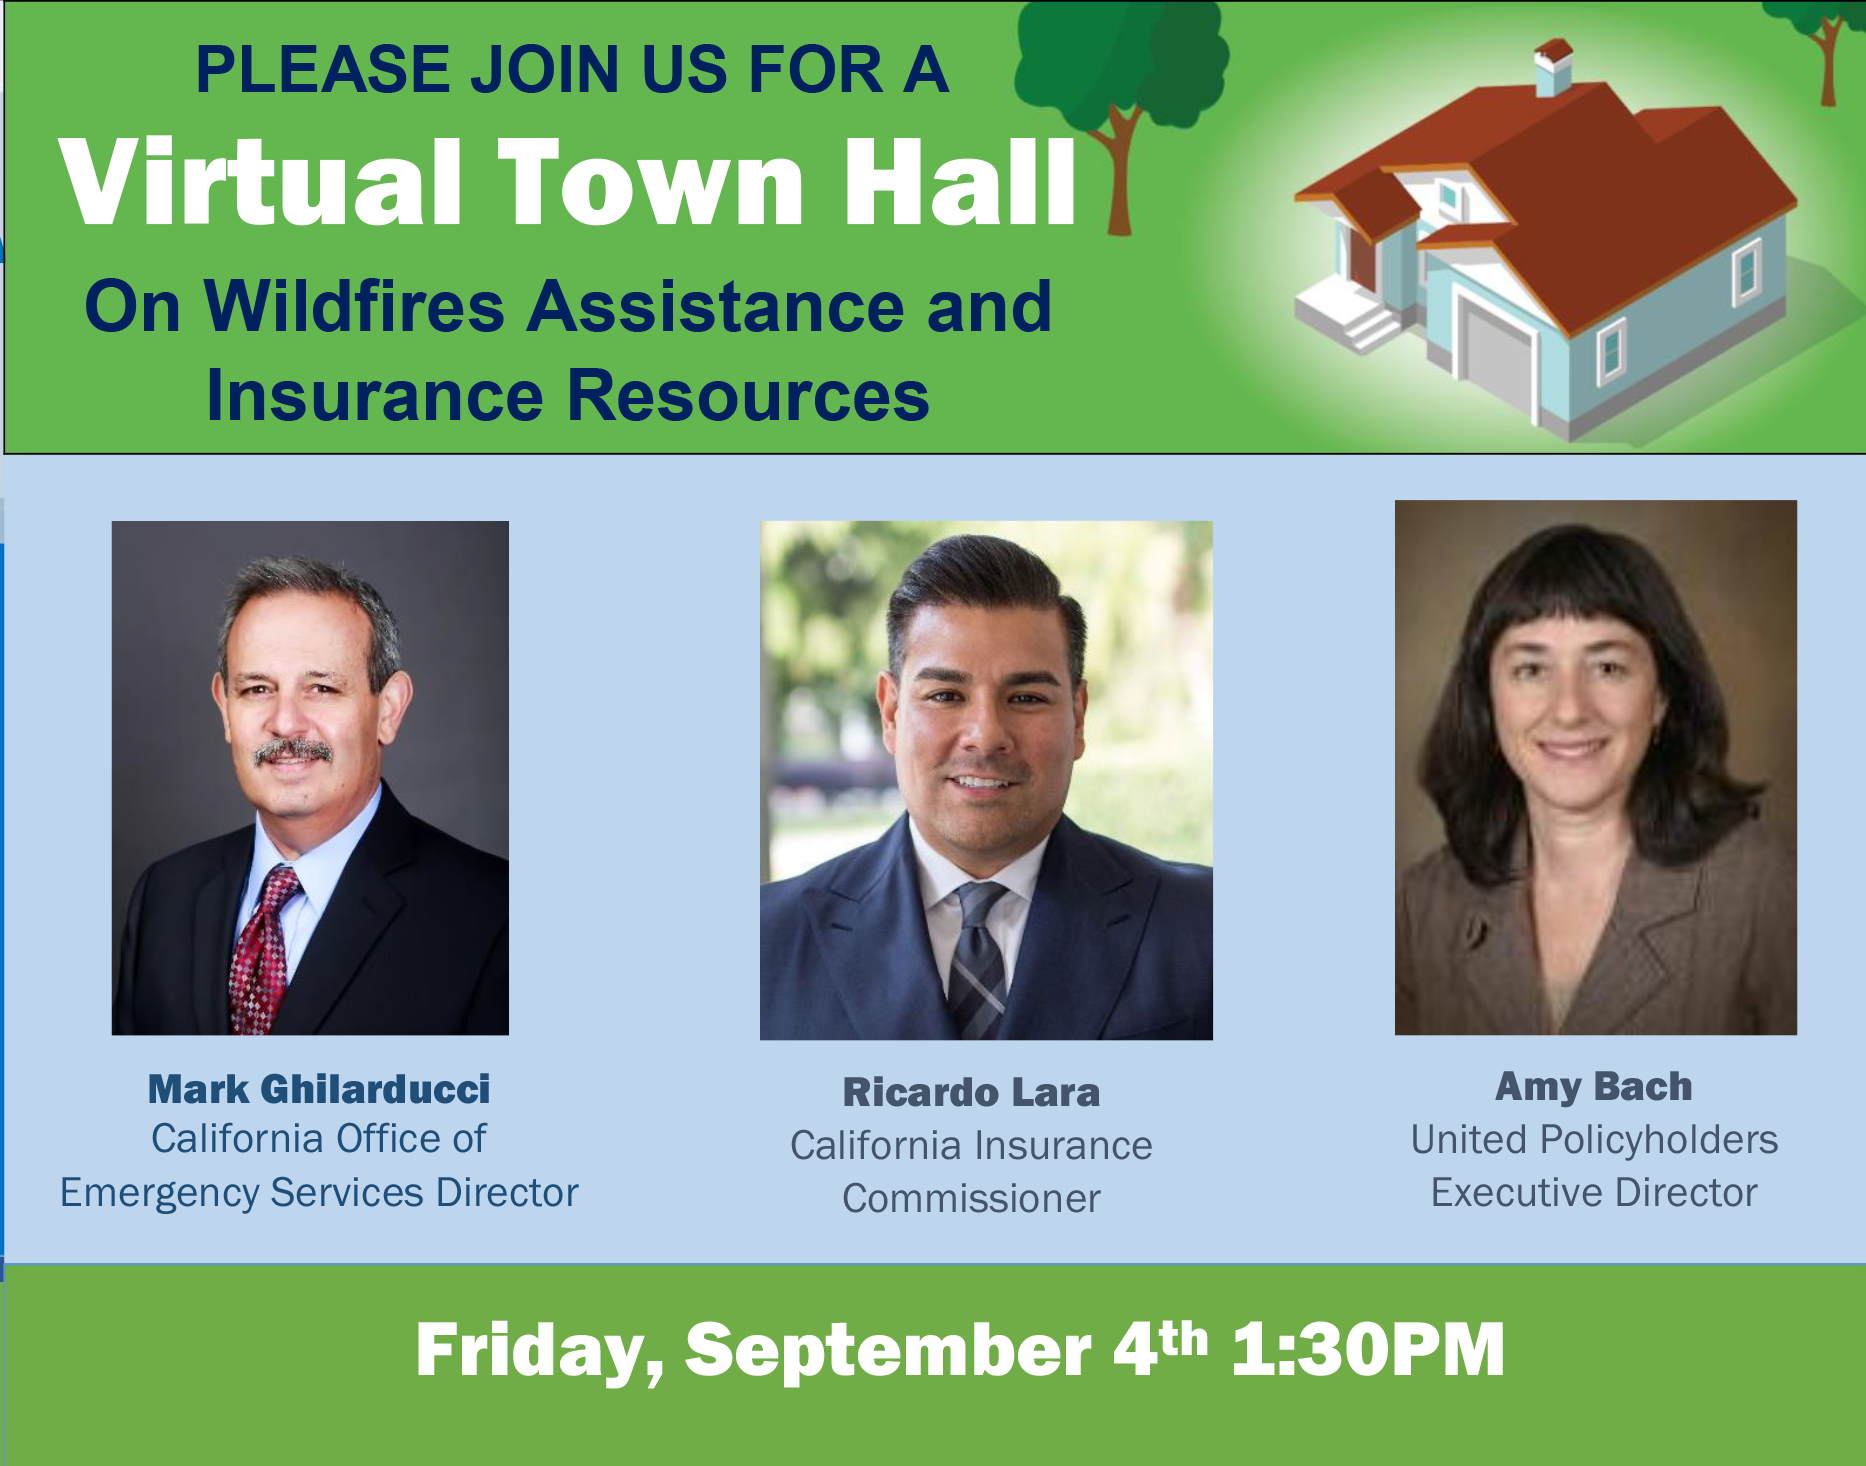 Please join CA Insurance Commissioner Ricardo Lara and United Policyholders Executive Director, Amy Bach and CalOES Director Mark Ghilarducci